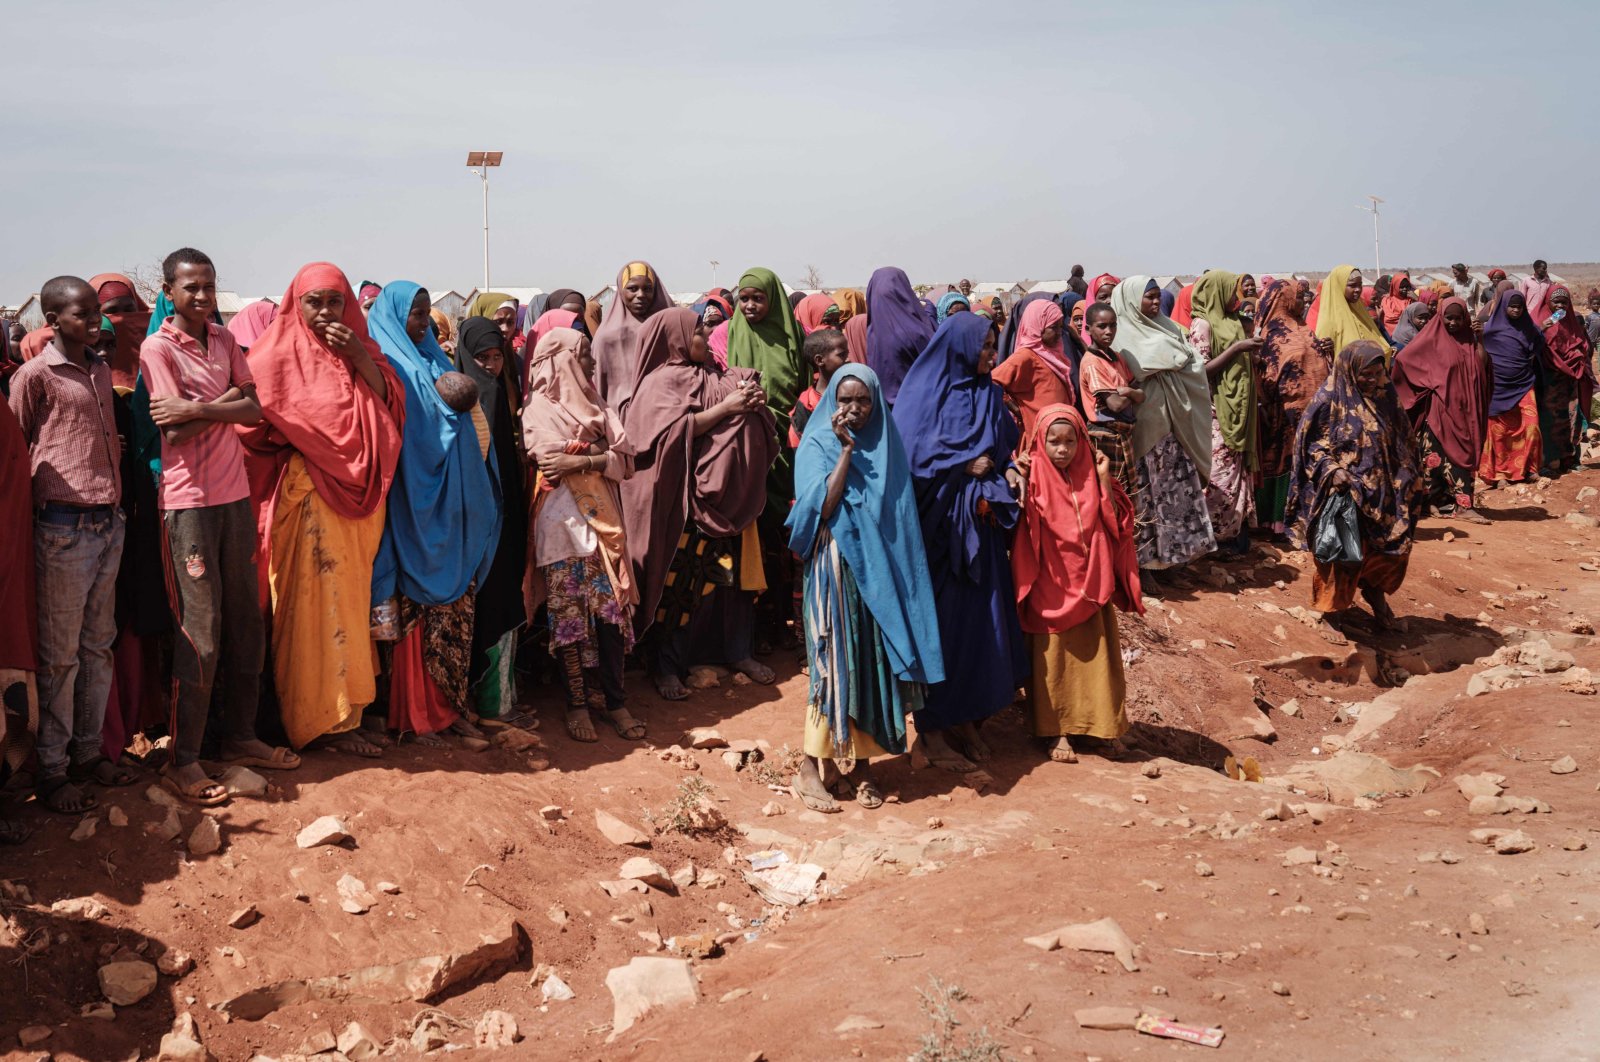 People wait for food distributions and health services at a camp for internally displaced persons (IDPs) in Baidoa, Somalia, on Feb. 14, 2022. (AFP Photo)